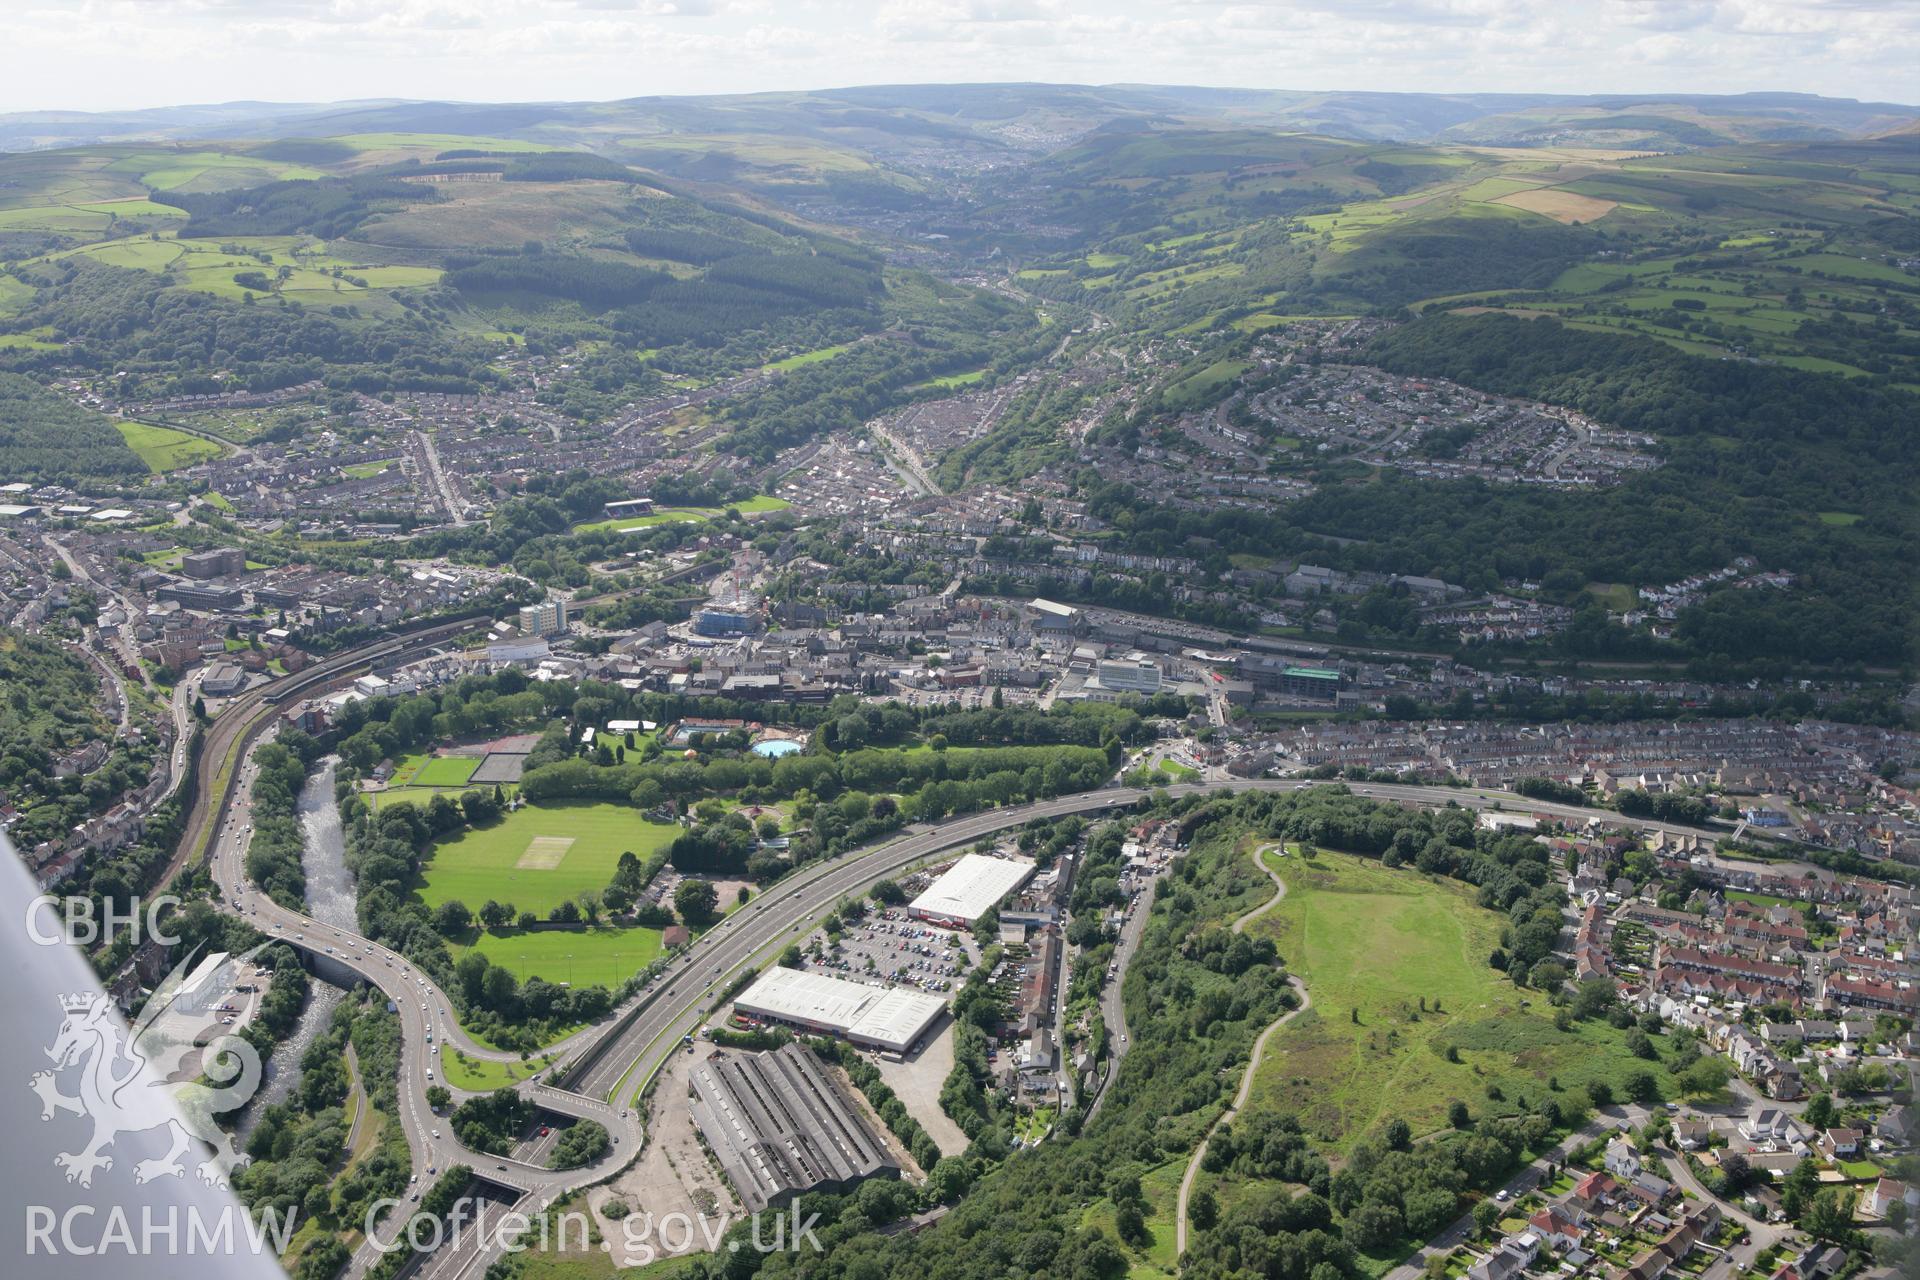 RCAHMW colour oblique aerial photograph of Pontypridd from the east. Taken on 30 July 2007 by Toby Driver